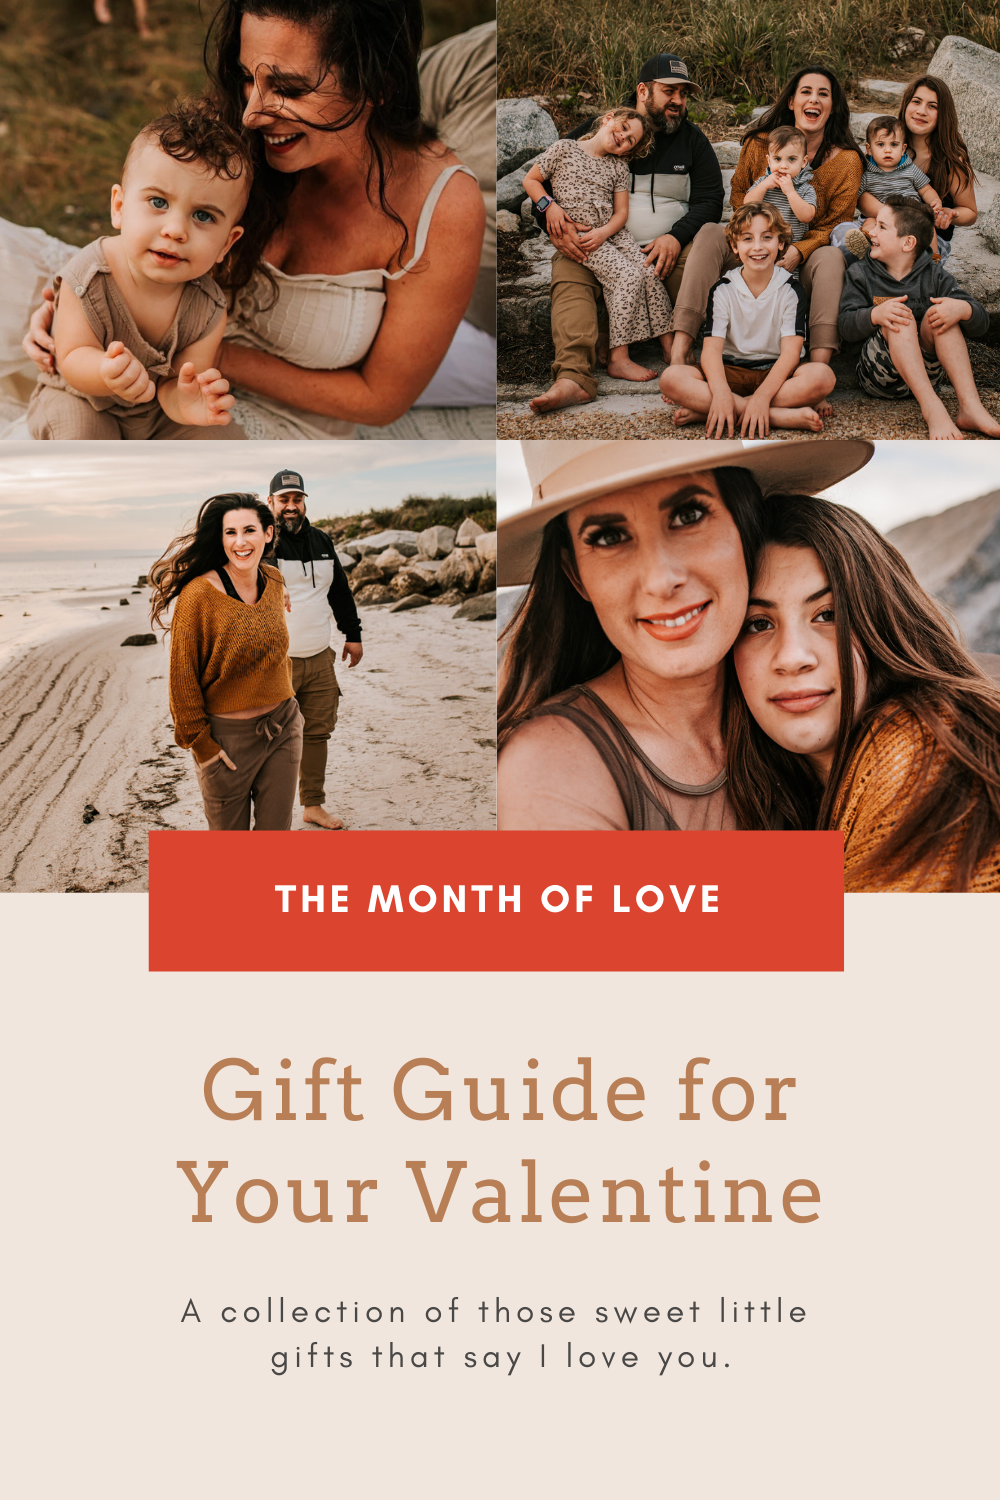 Valentine's Day Gift Ideas for Children featured by top US lifestyle blogger, Tabitha Blue, Fresh Mommy Blog.